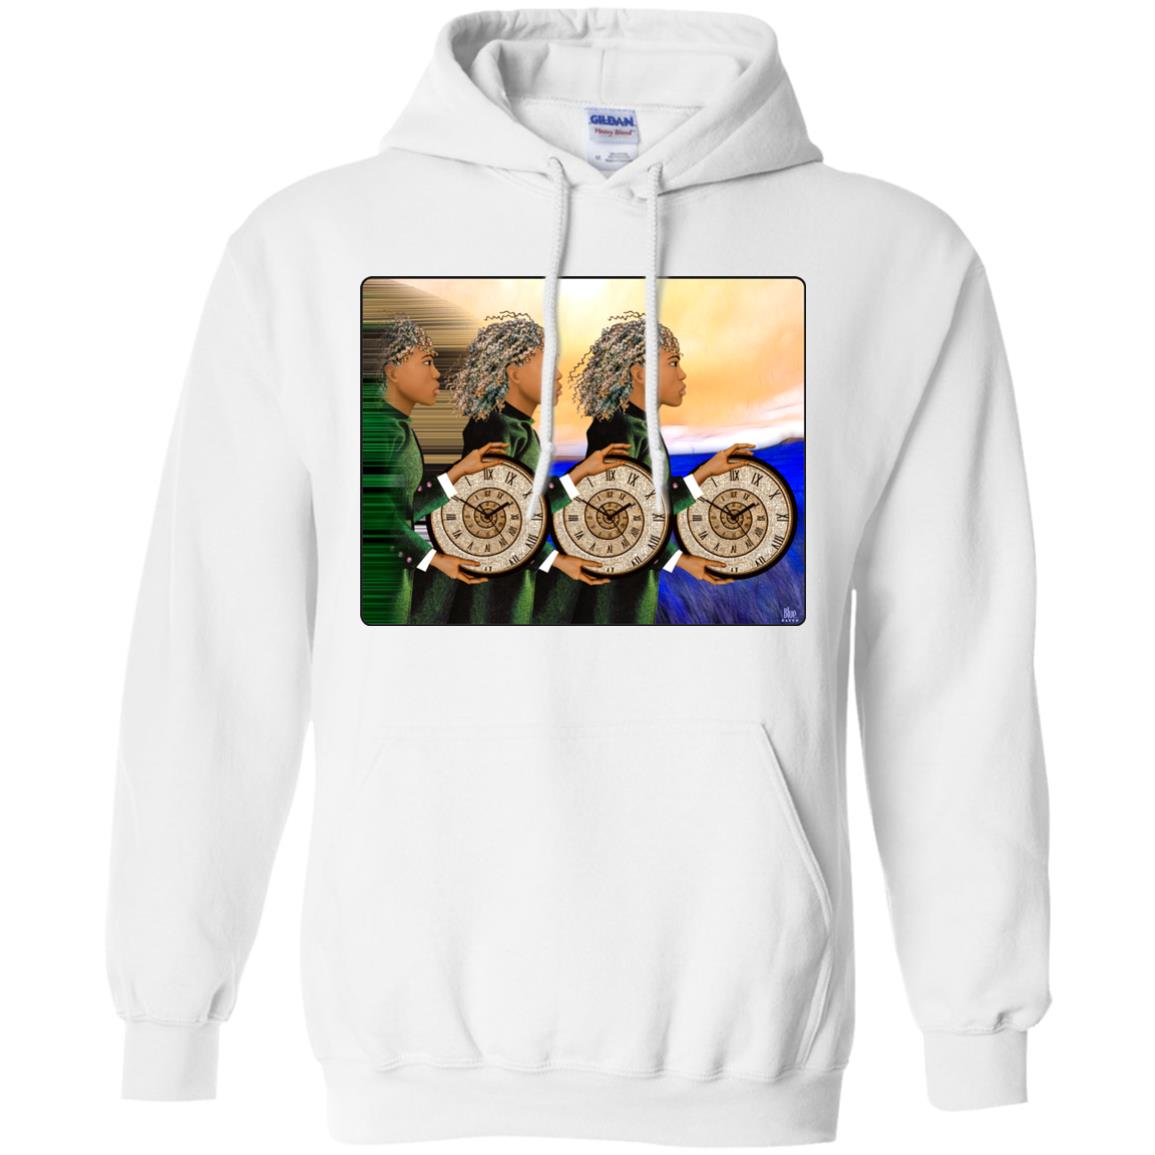 Time To Push Forward - Adult Hoodie